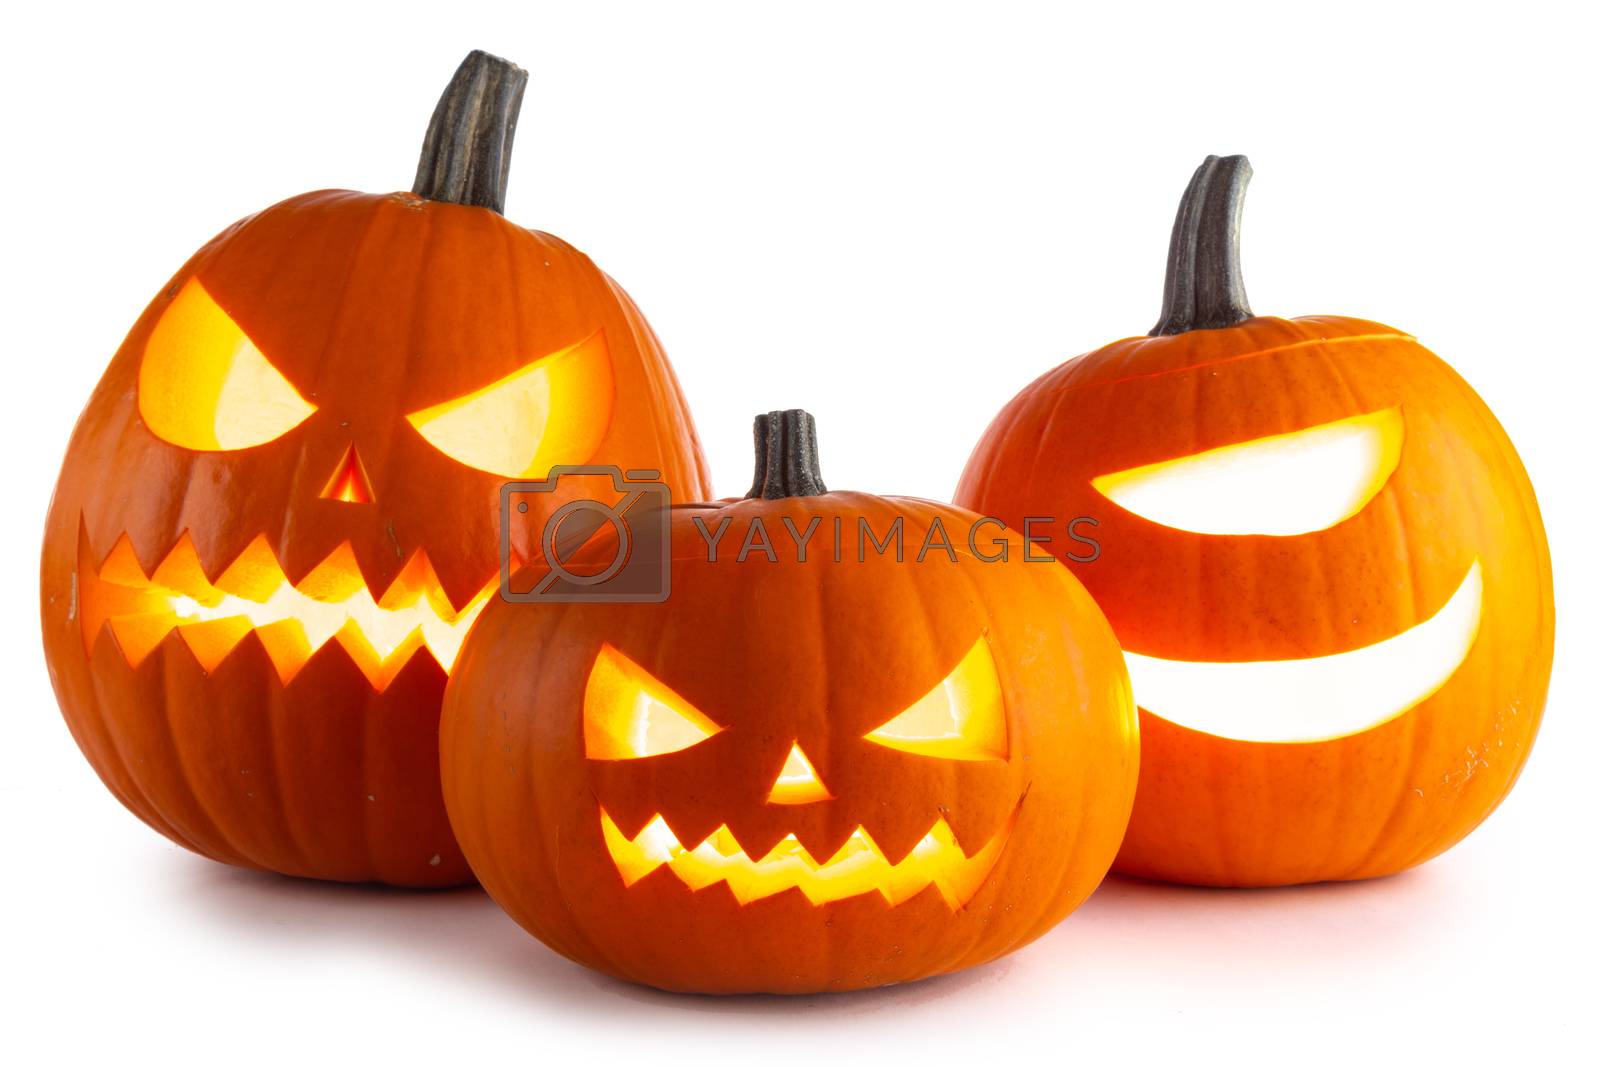 Royalty free image of Halloween Pumpkins on white by Yellowj